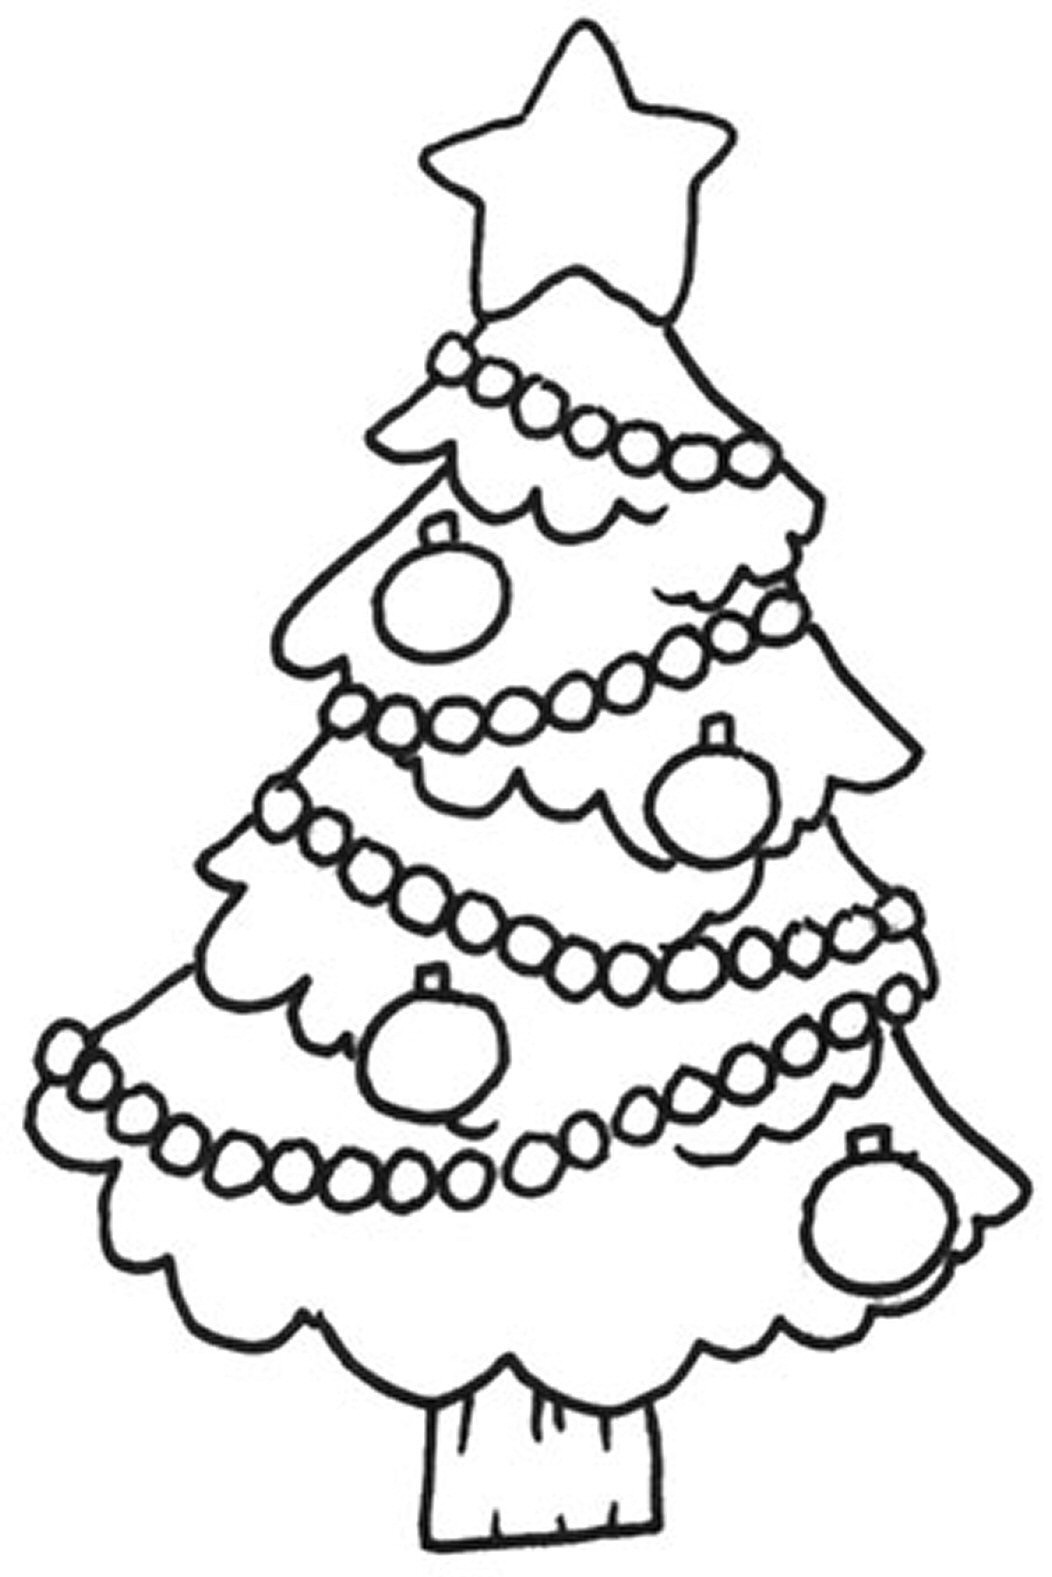 Printable Coloring Pages Christmas
 Free Printable Christmas Tree Coloring Pages For Kids